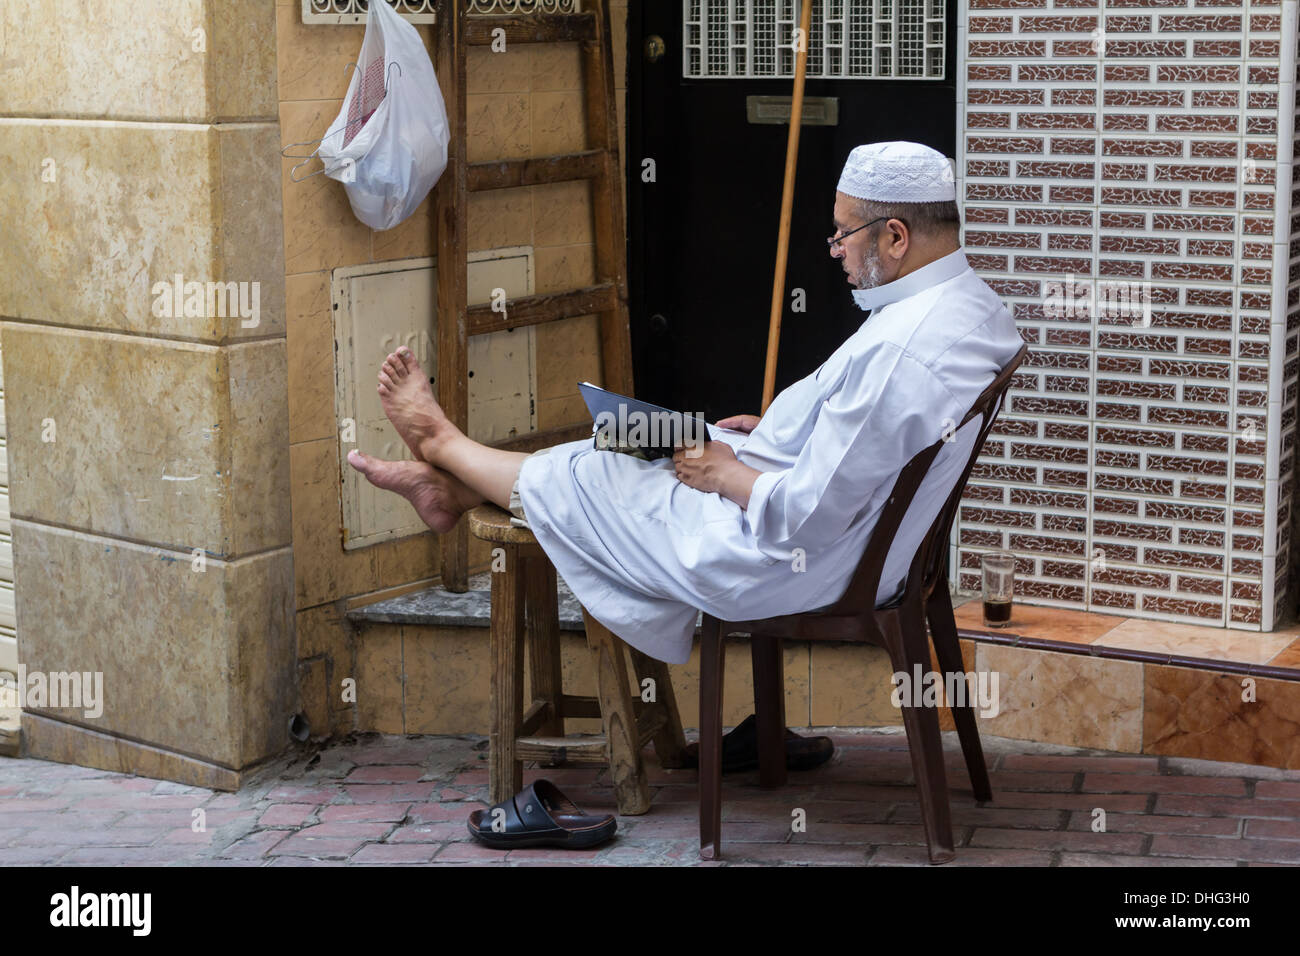 A man sitting on the street and reading a book, Tangier Stock Photo